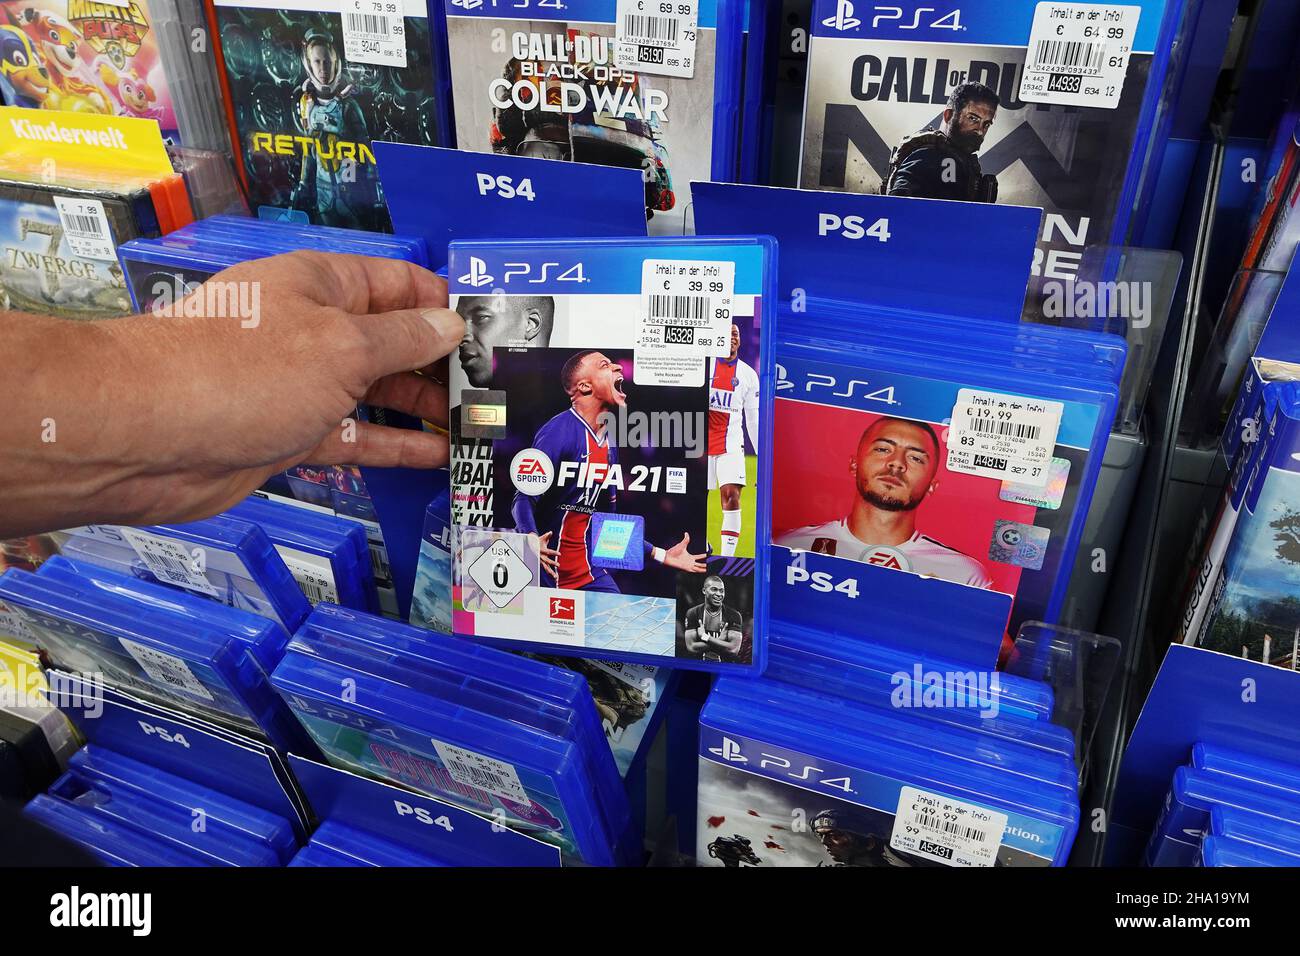 Store display filled with PlayStation 4 games for a home video game console. Stock Photo